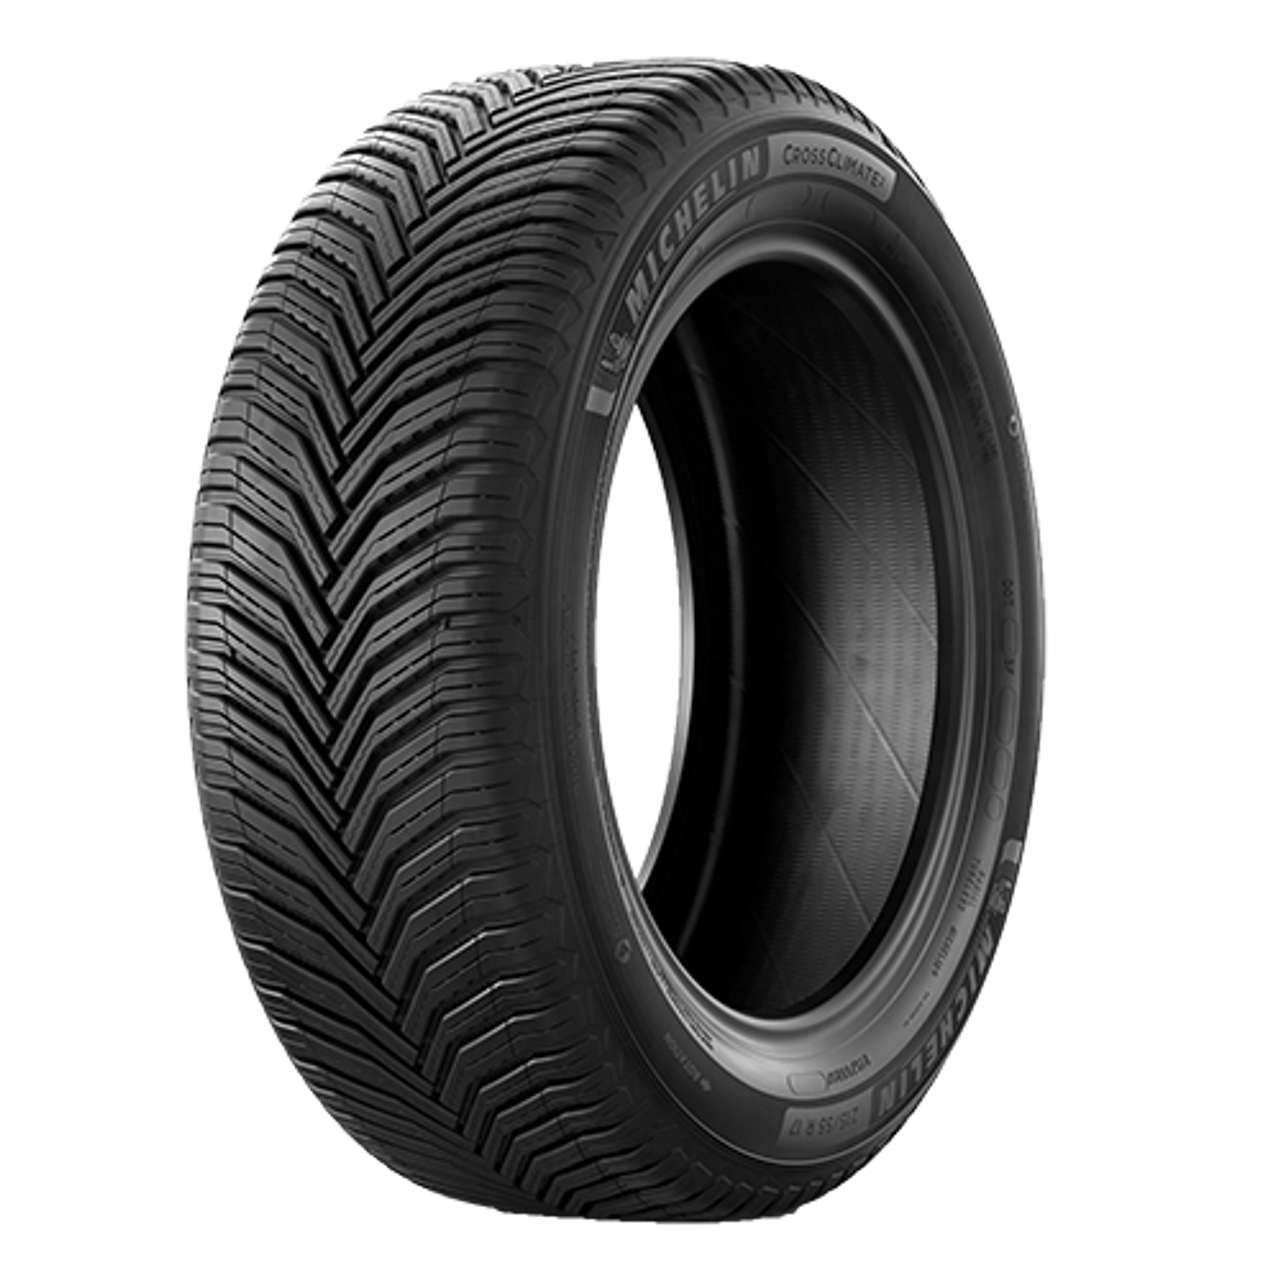 MICHELIN CROSSCLIMATE 2 225/55R18 98V BSW